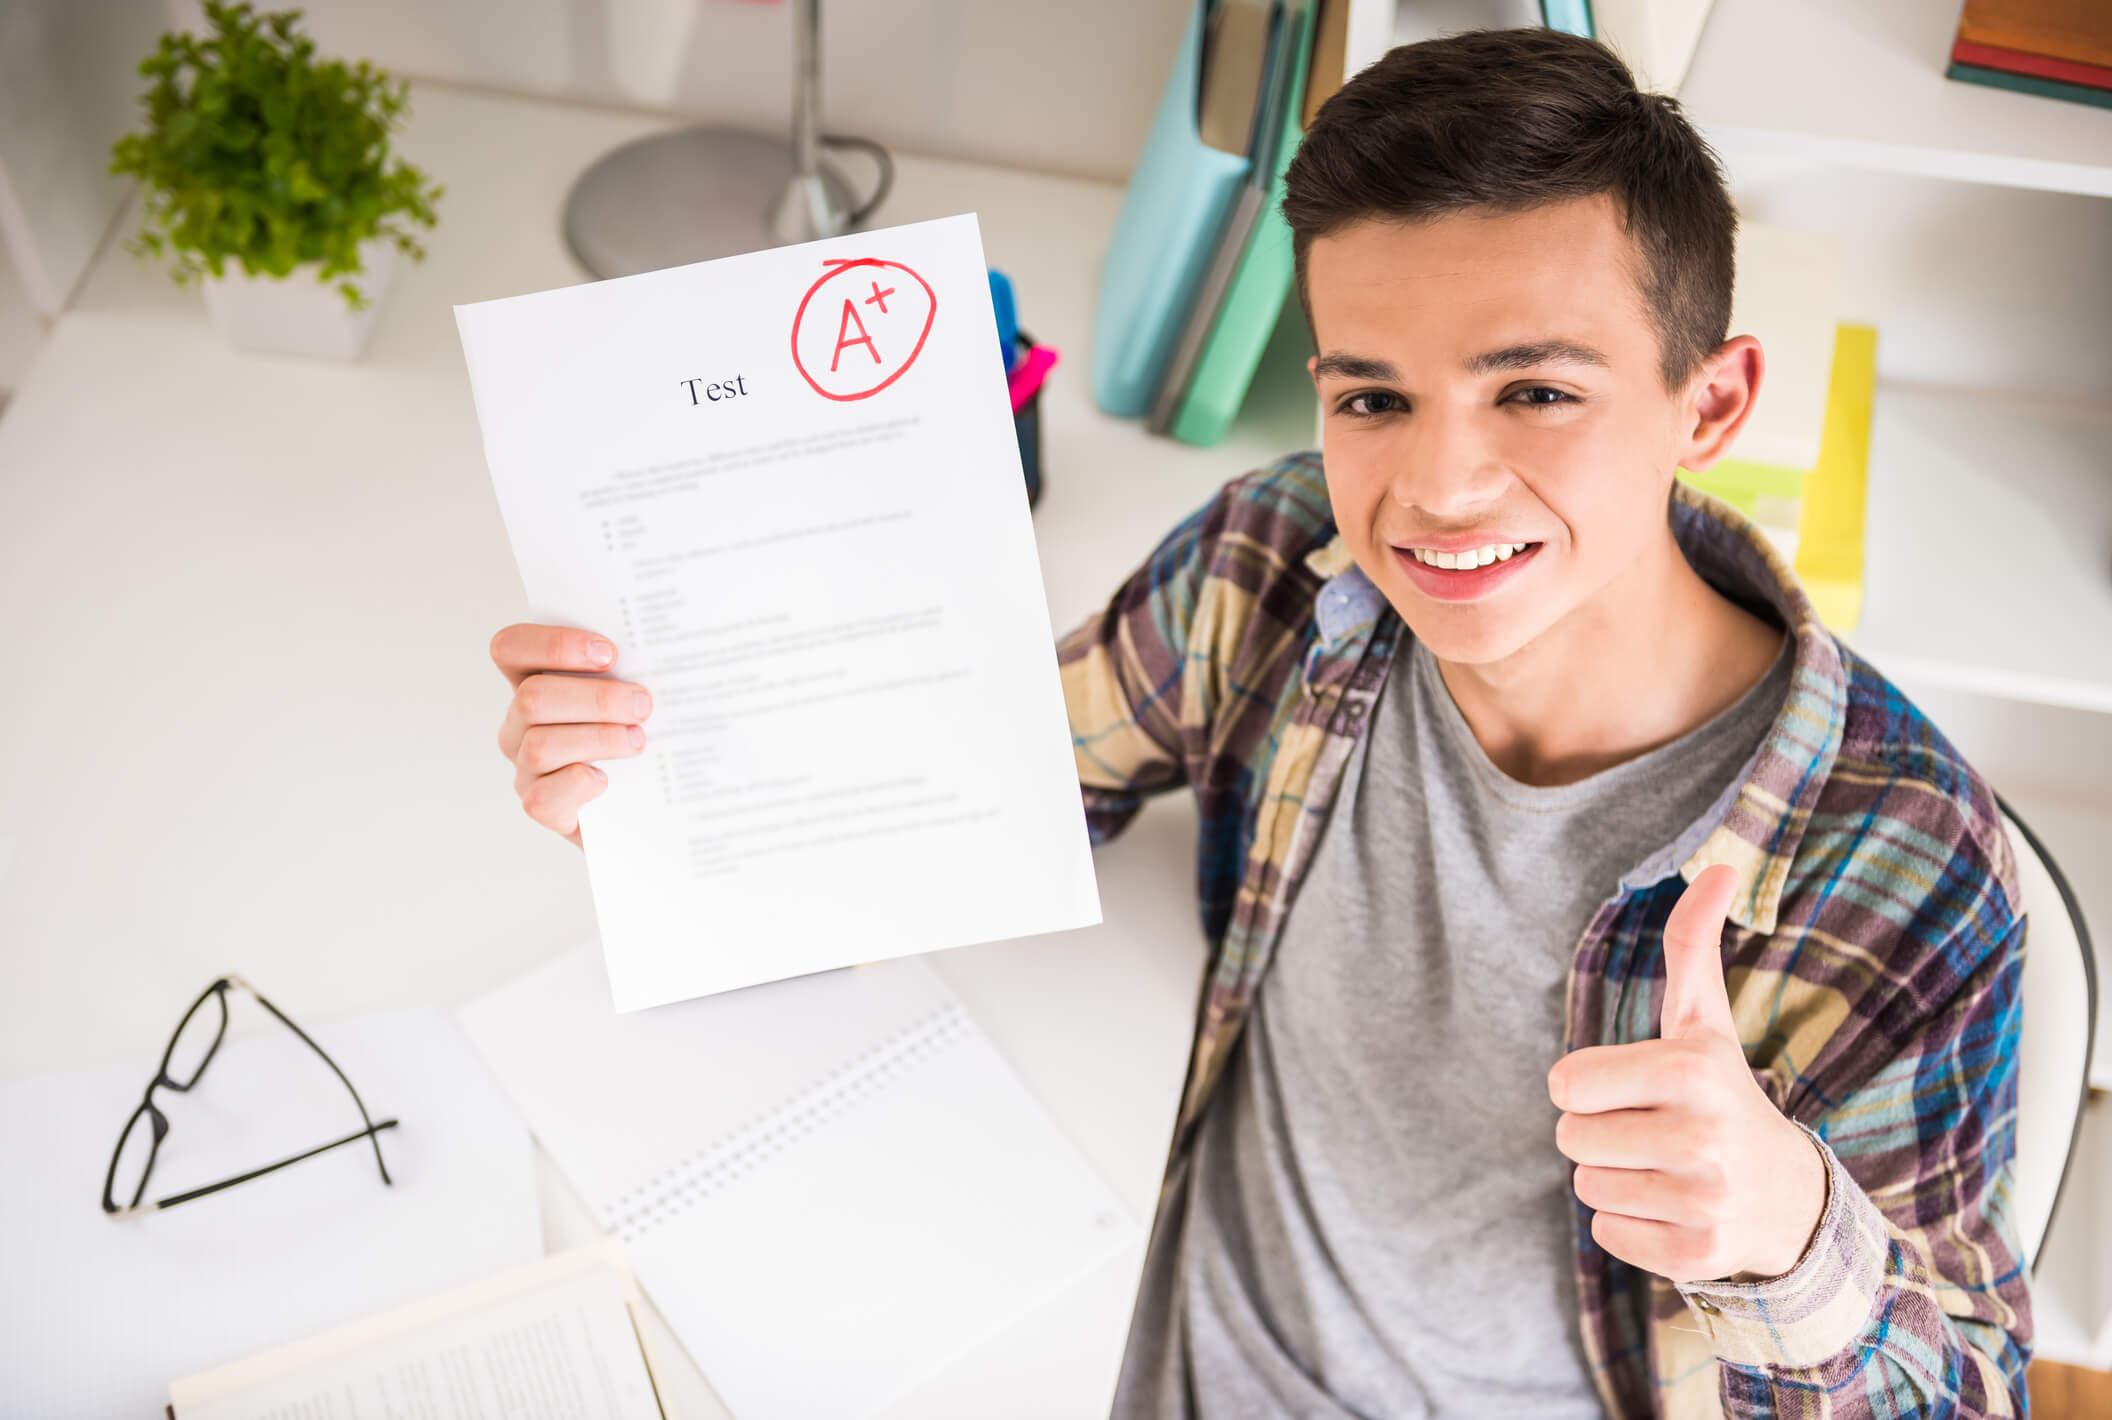 10 Tips for Improvements Before Your Next Report Card